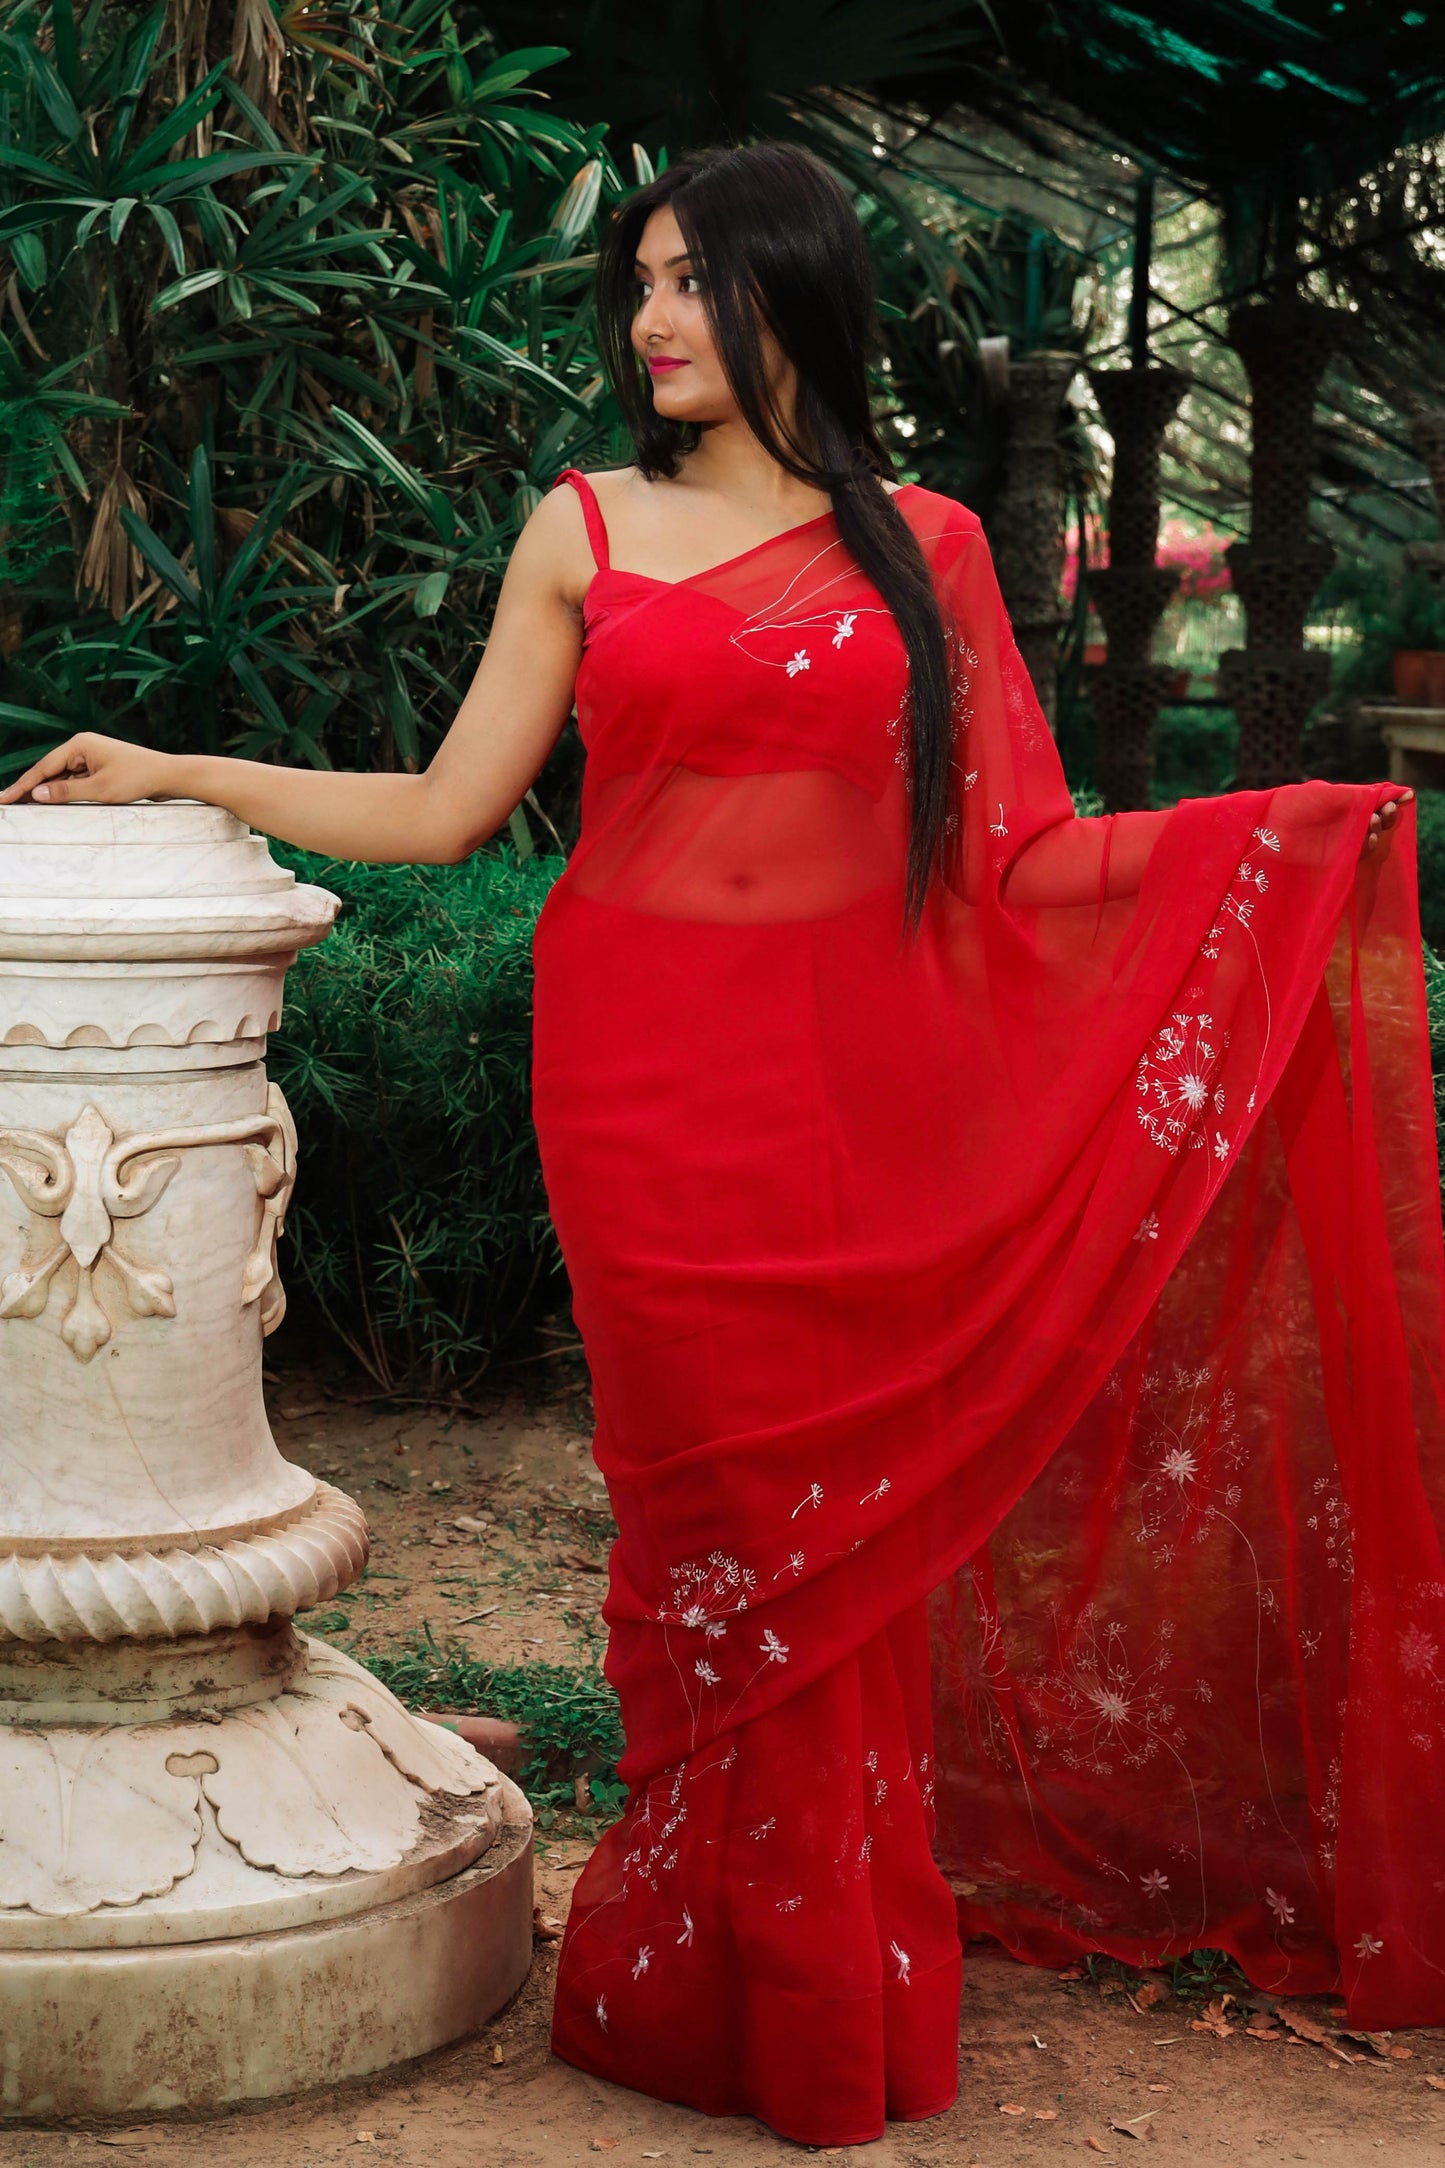 Hand painted red chiffon dandelion saree enhanced with sequin and pearl embroidery.